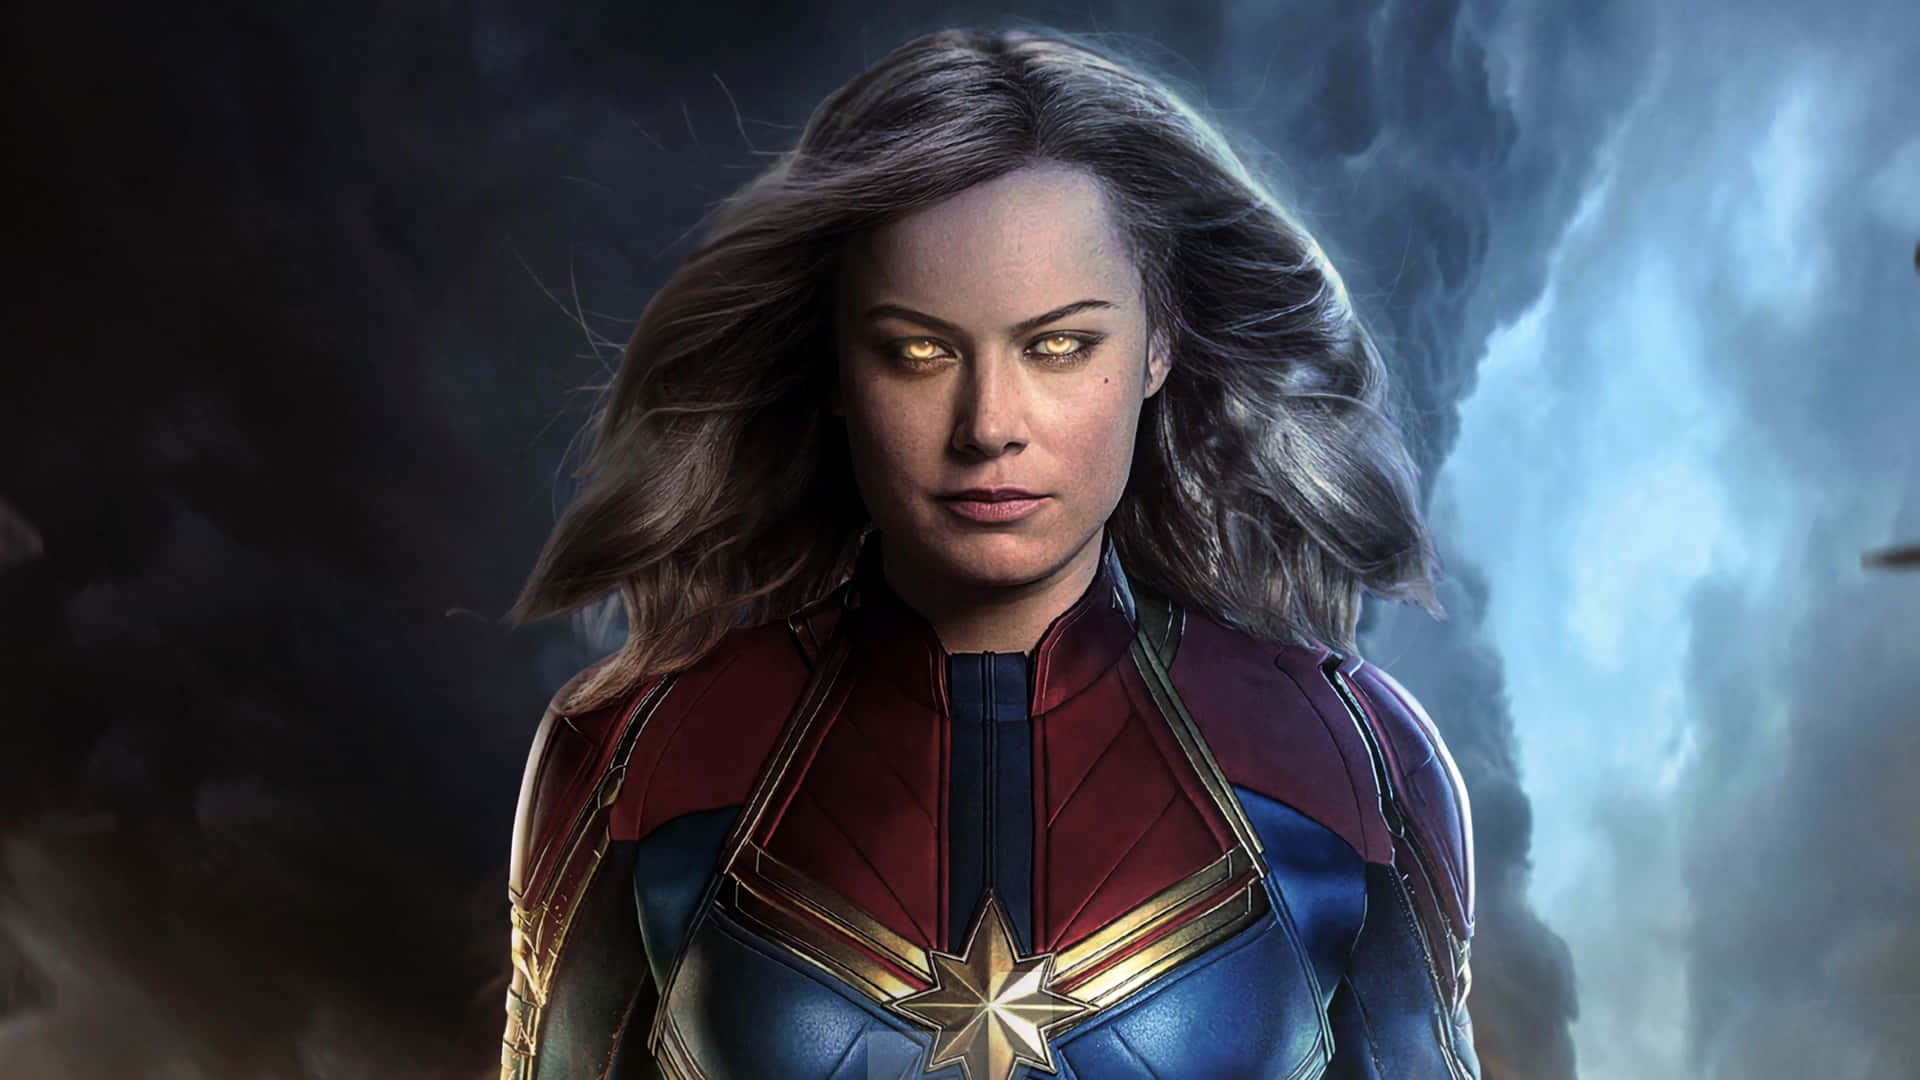 Brie Larson as Captain Marvel in a Stunning Pose Wallpaper